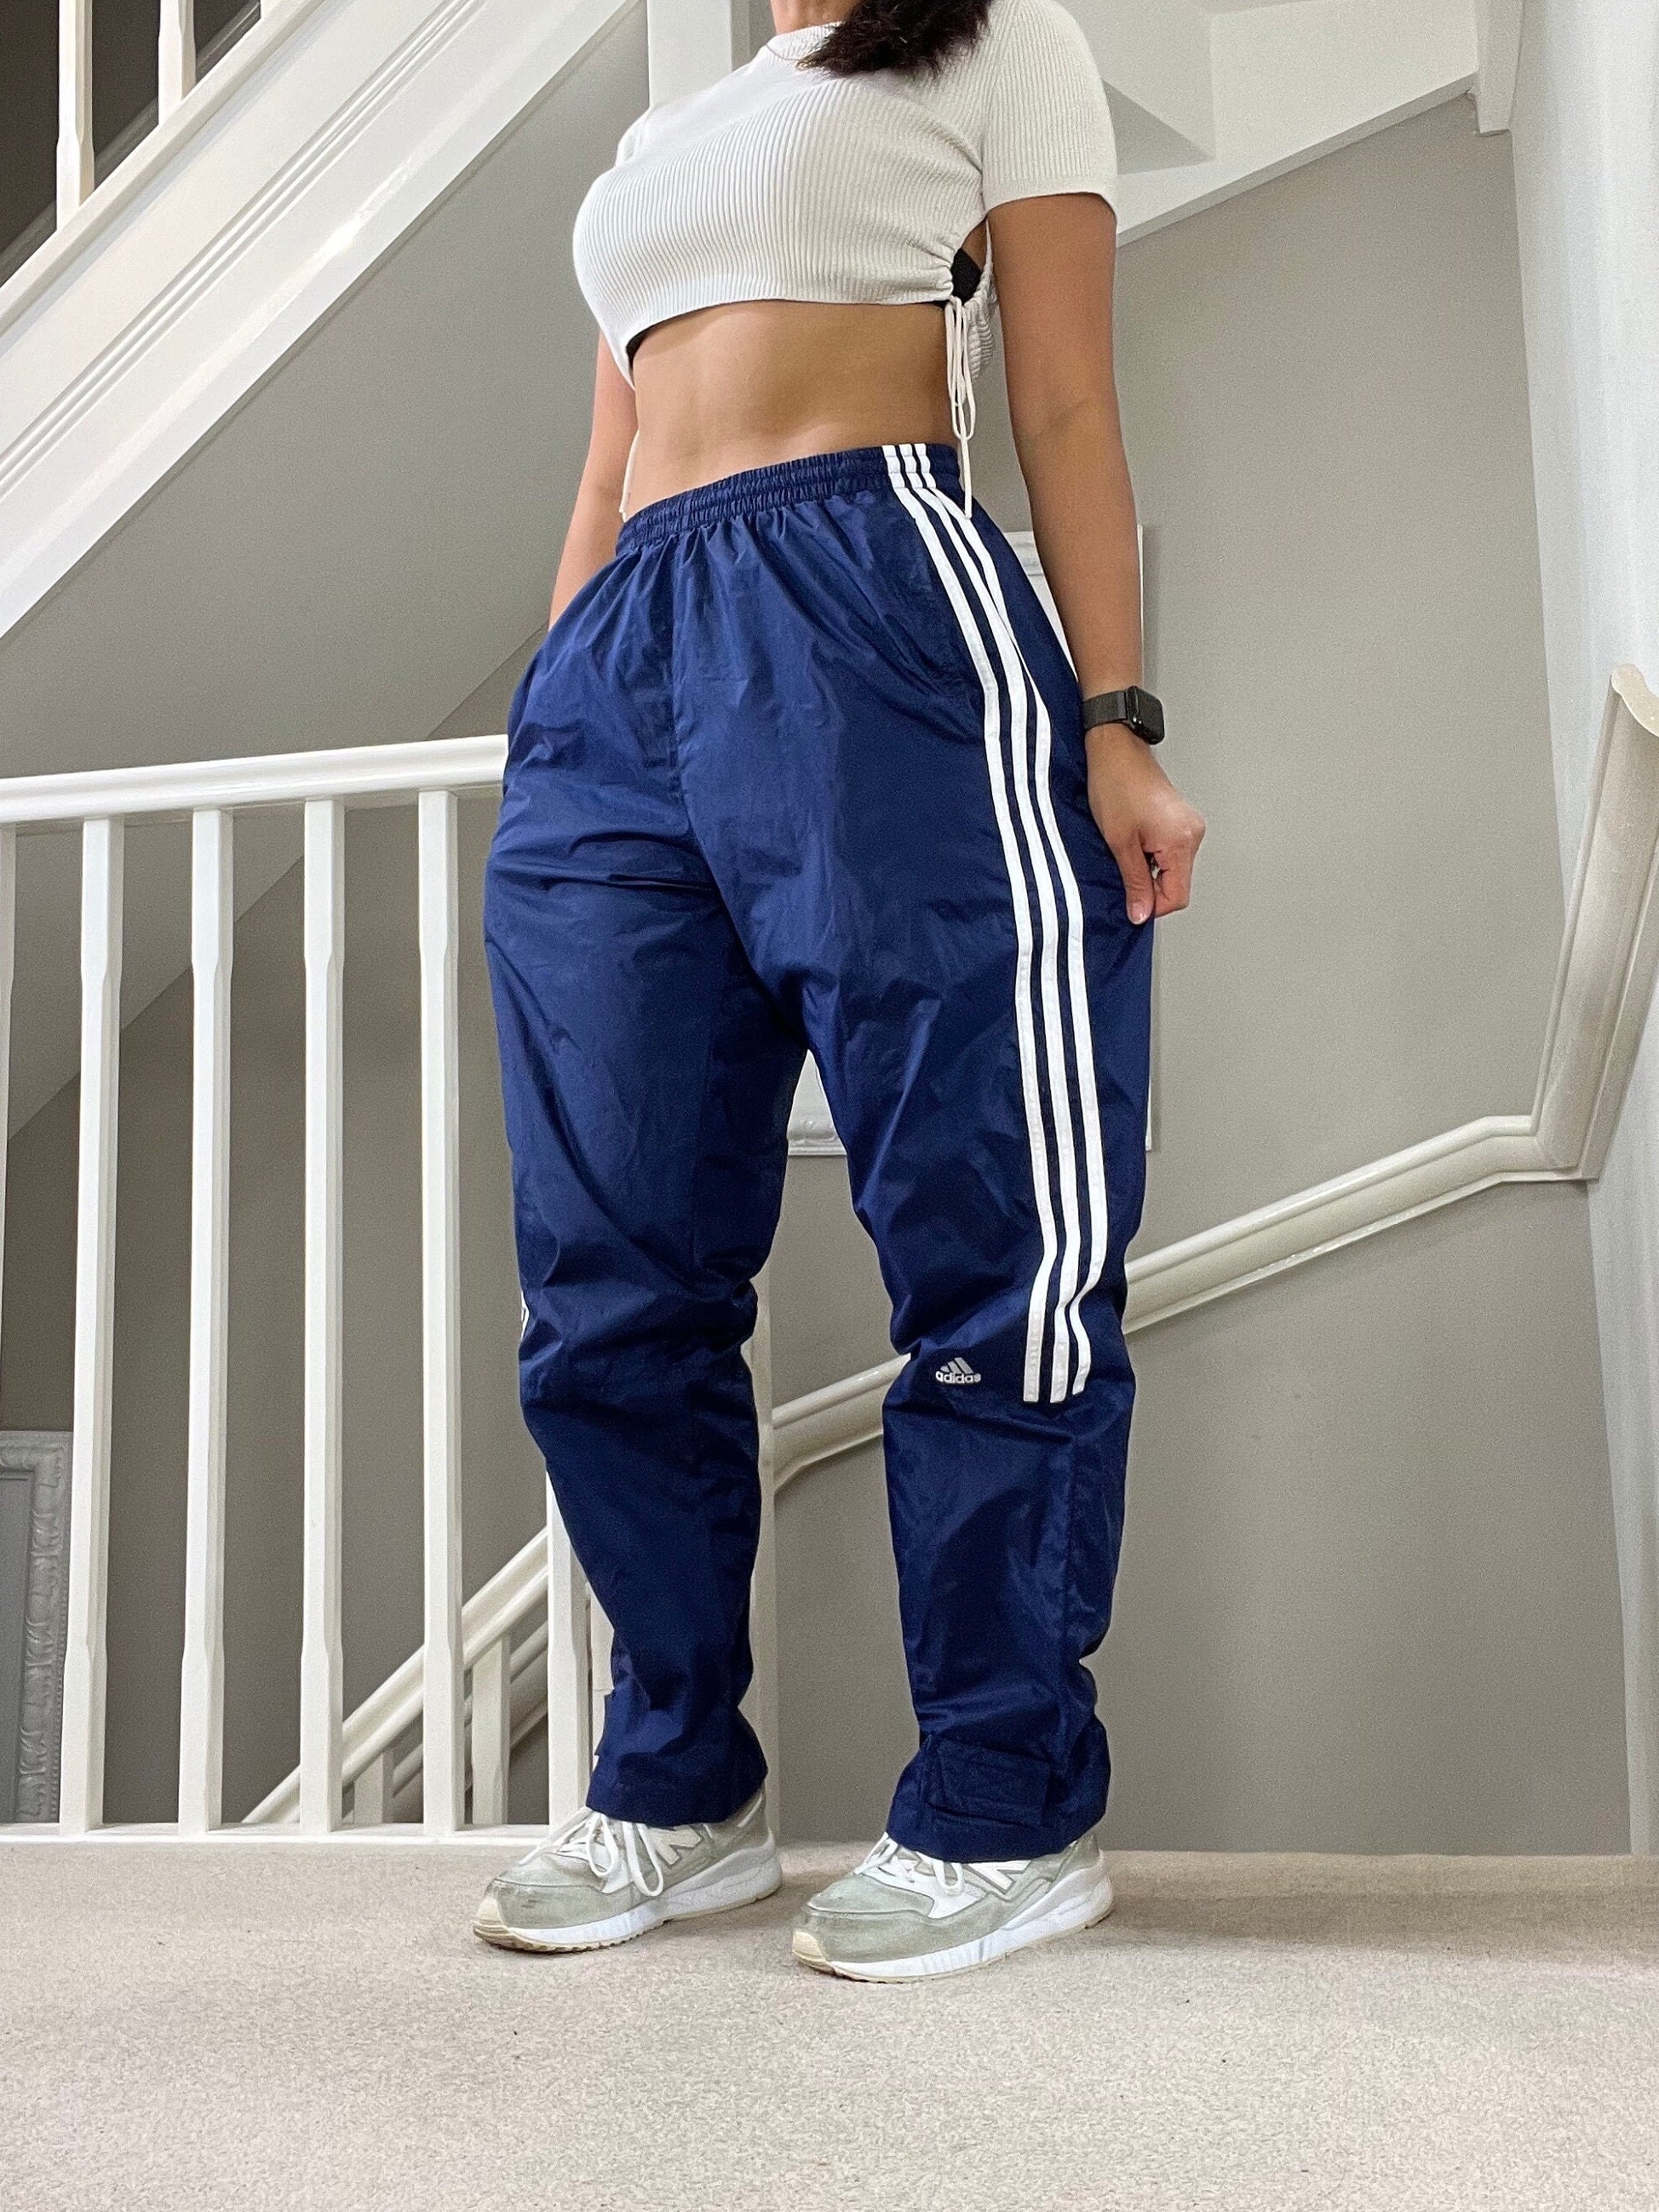 Vintage Adidas Baggy Fit Windbrea Shellsuit Track Pants Size M Unisex in  Blue Colourway With White Stripes 